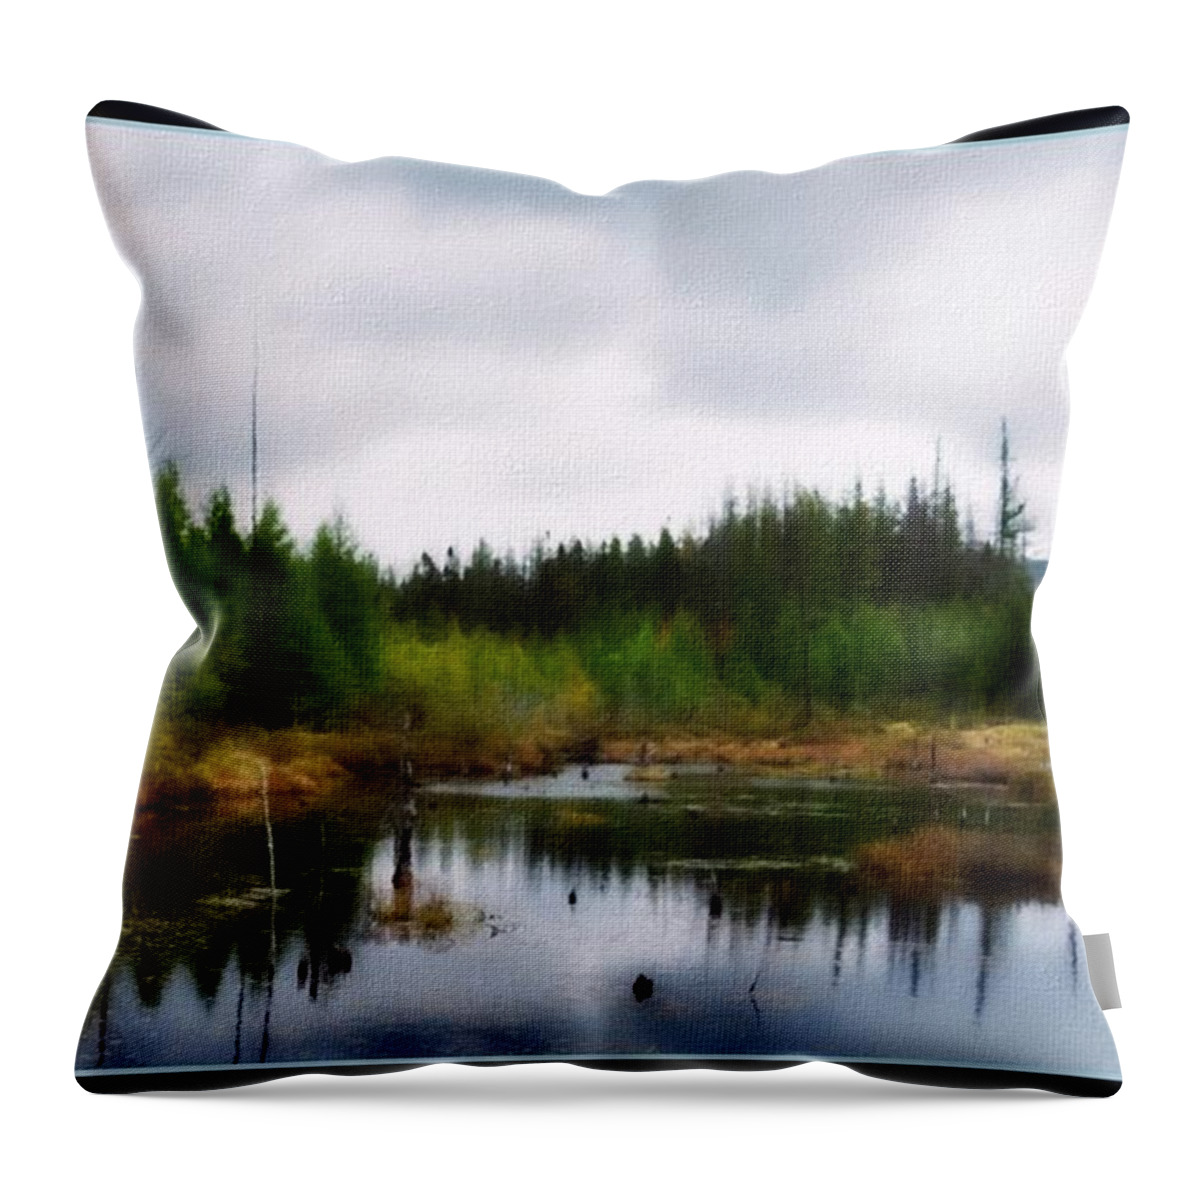 Adirondack Mountains Throw Pillow featuring the painting Backcountry Lake - Adirondacks by Linda Seifried